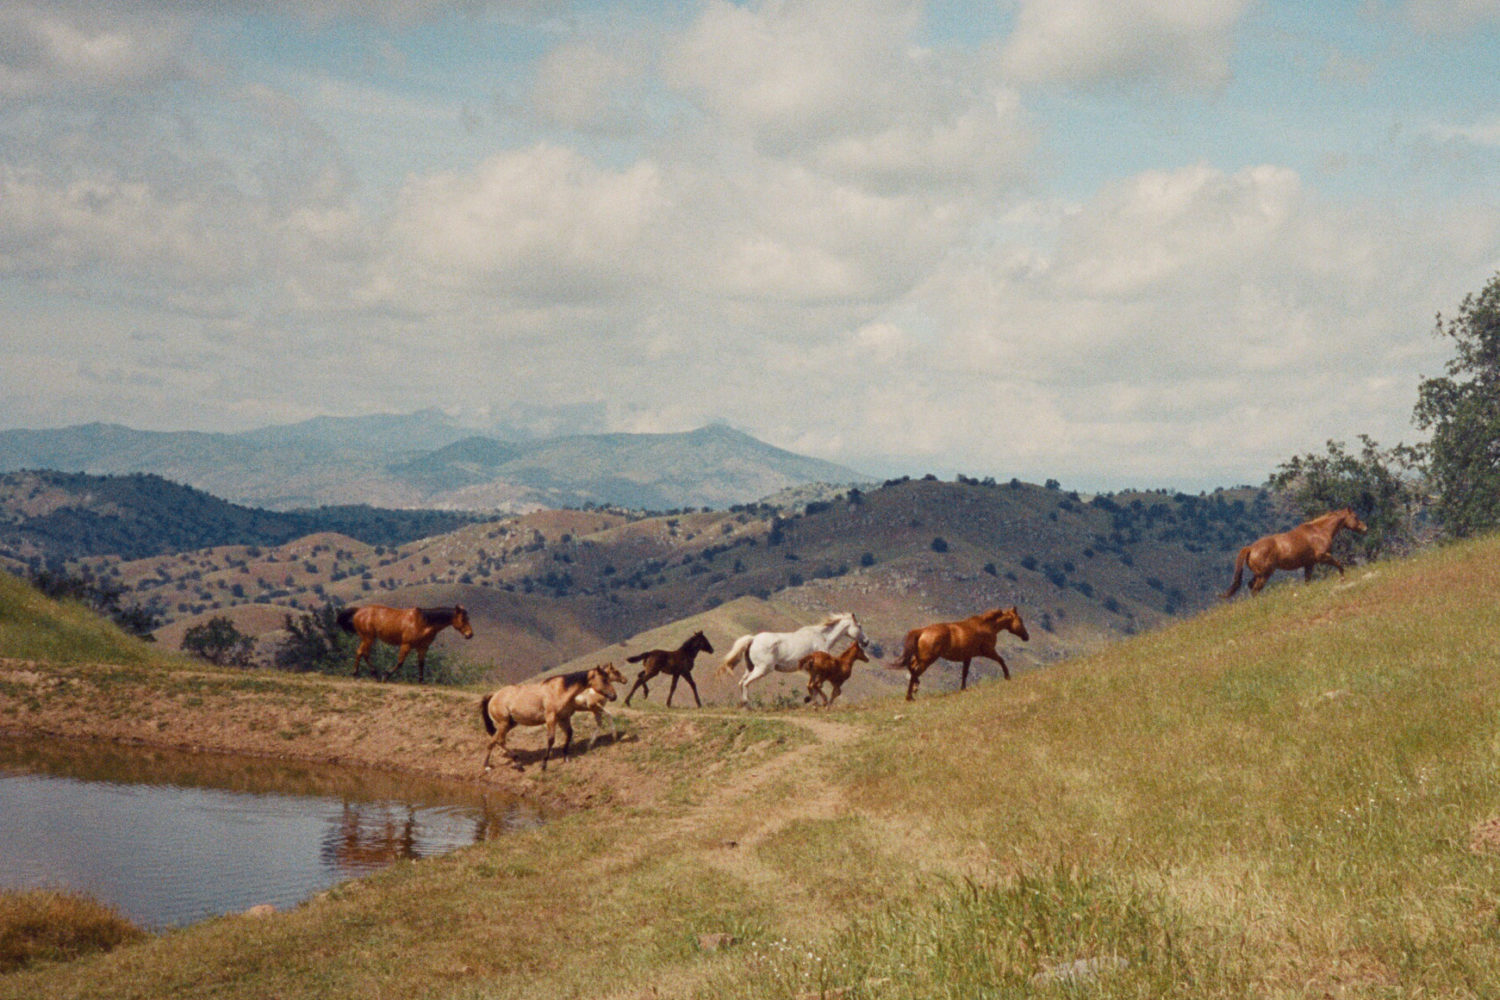 8 horses on the crest of a hill with low mountains in the distance